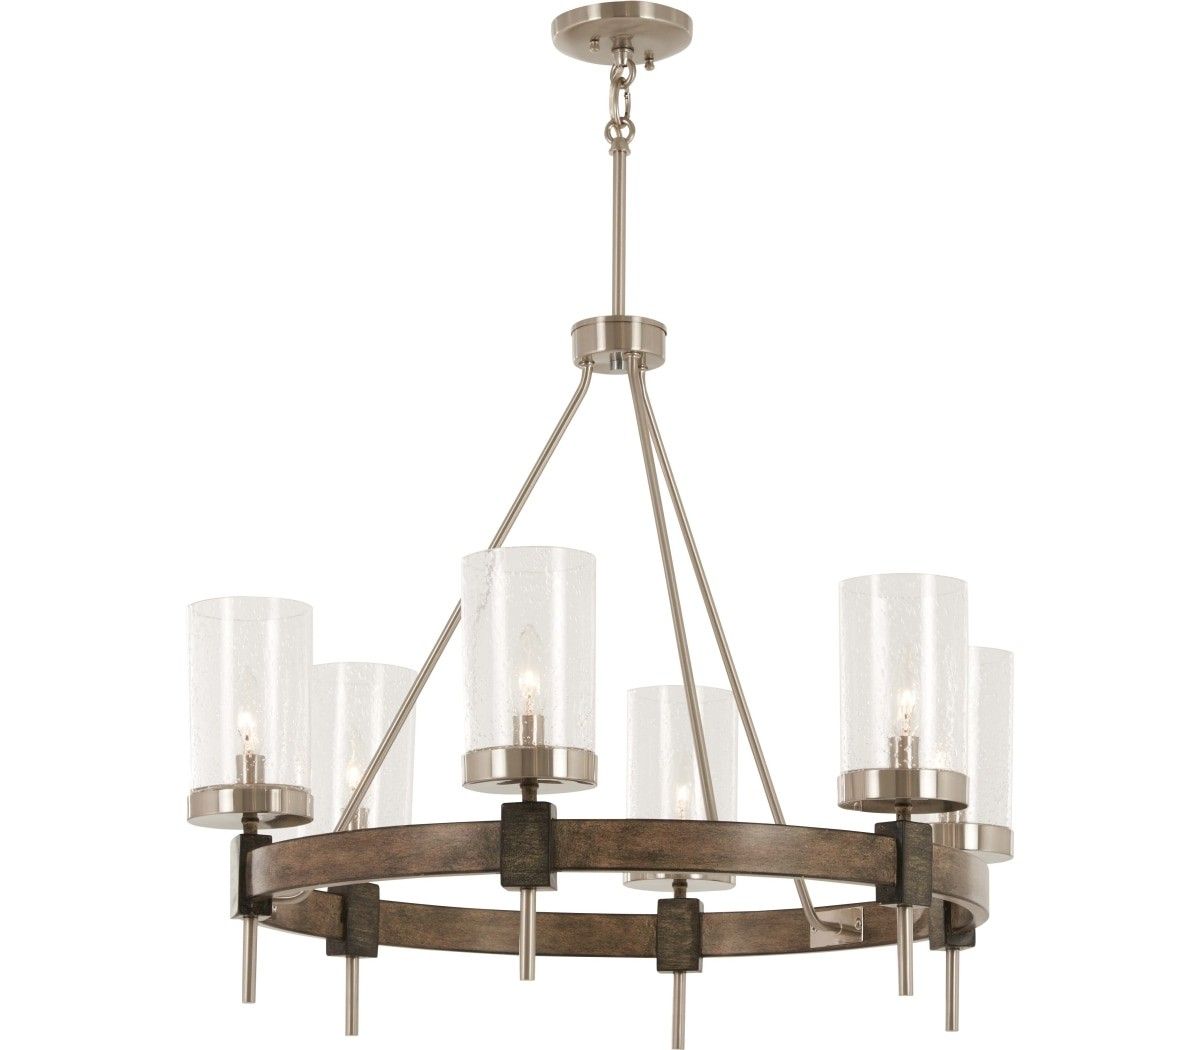 Minka Lavery 4638 106 Bridlewood 8 Light Stone Grey With Regard To Stone Grey With Brushed Nickel Six Light Chandeliers (View 5 of 15)